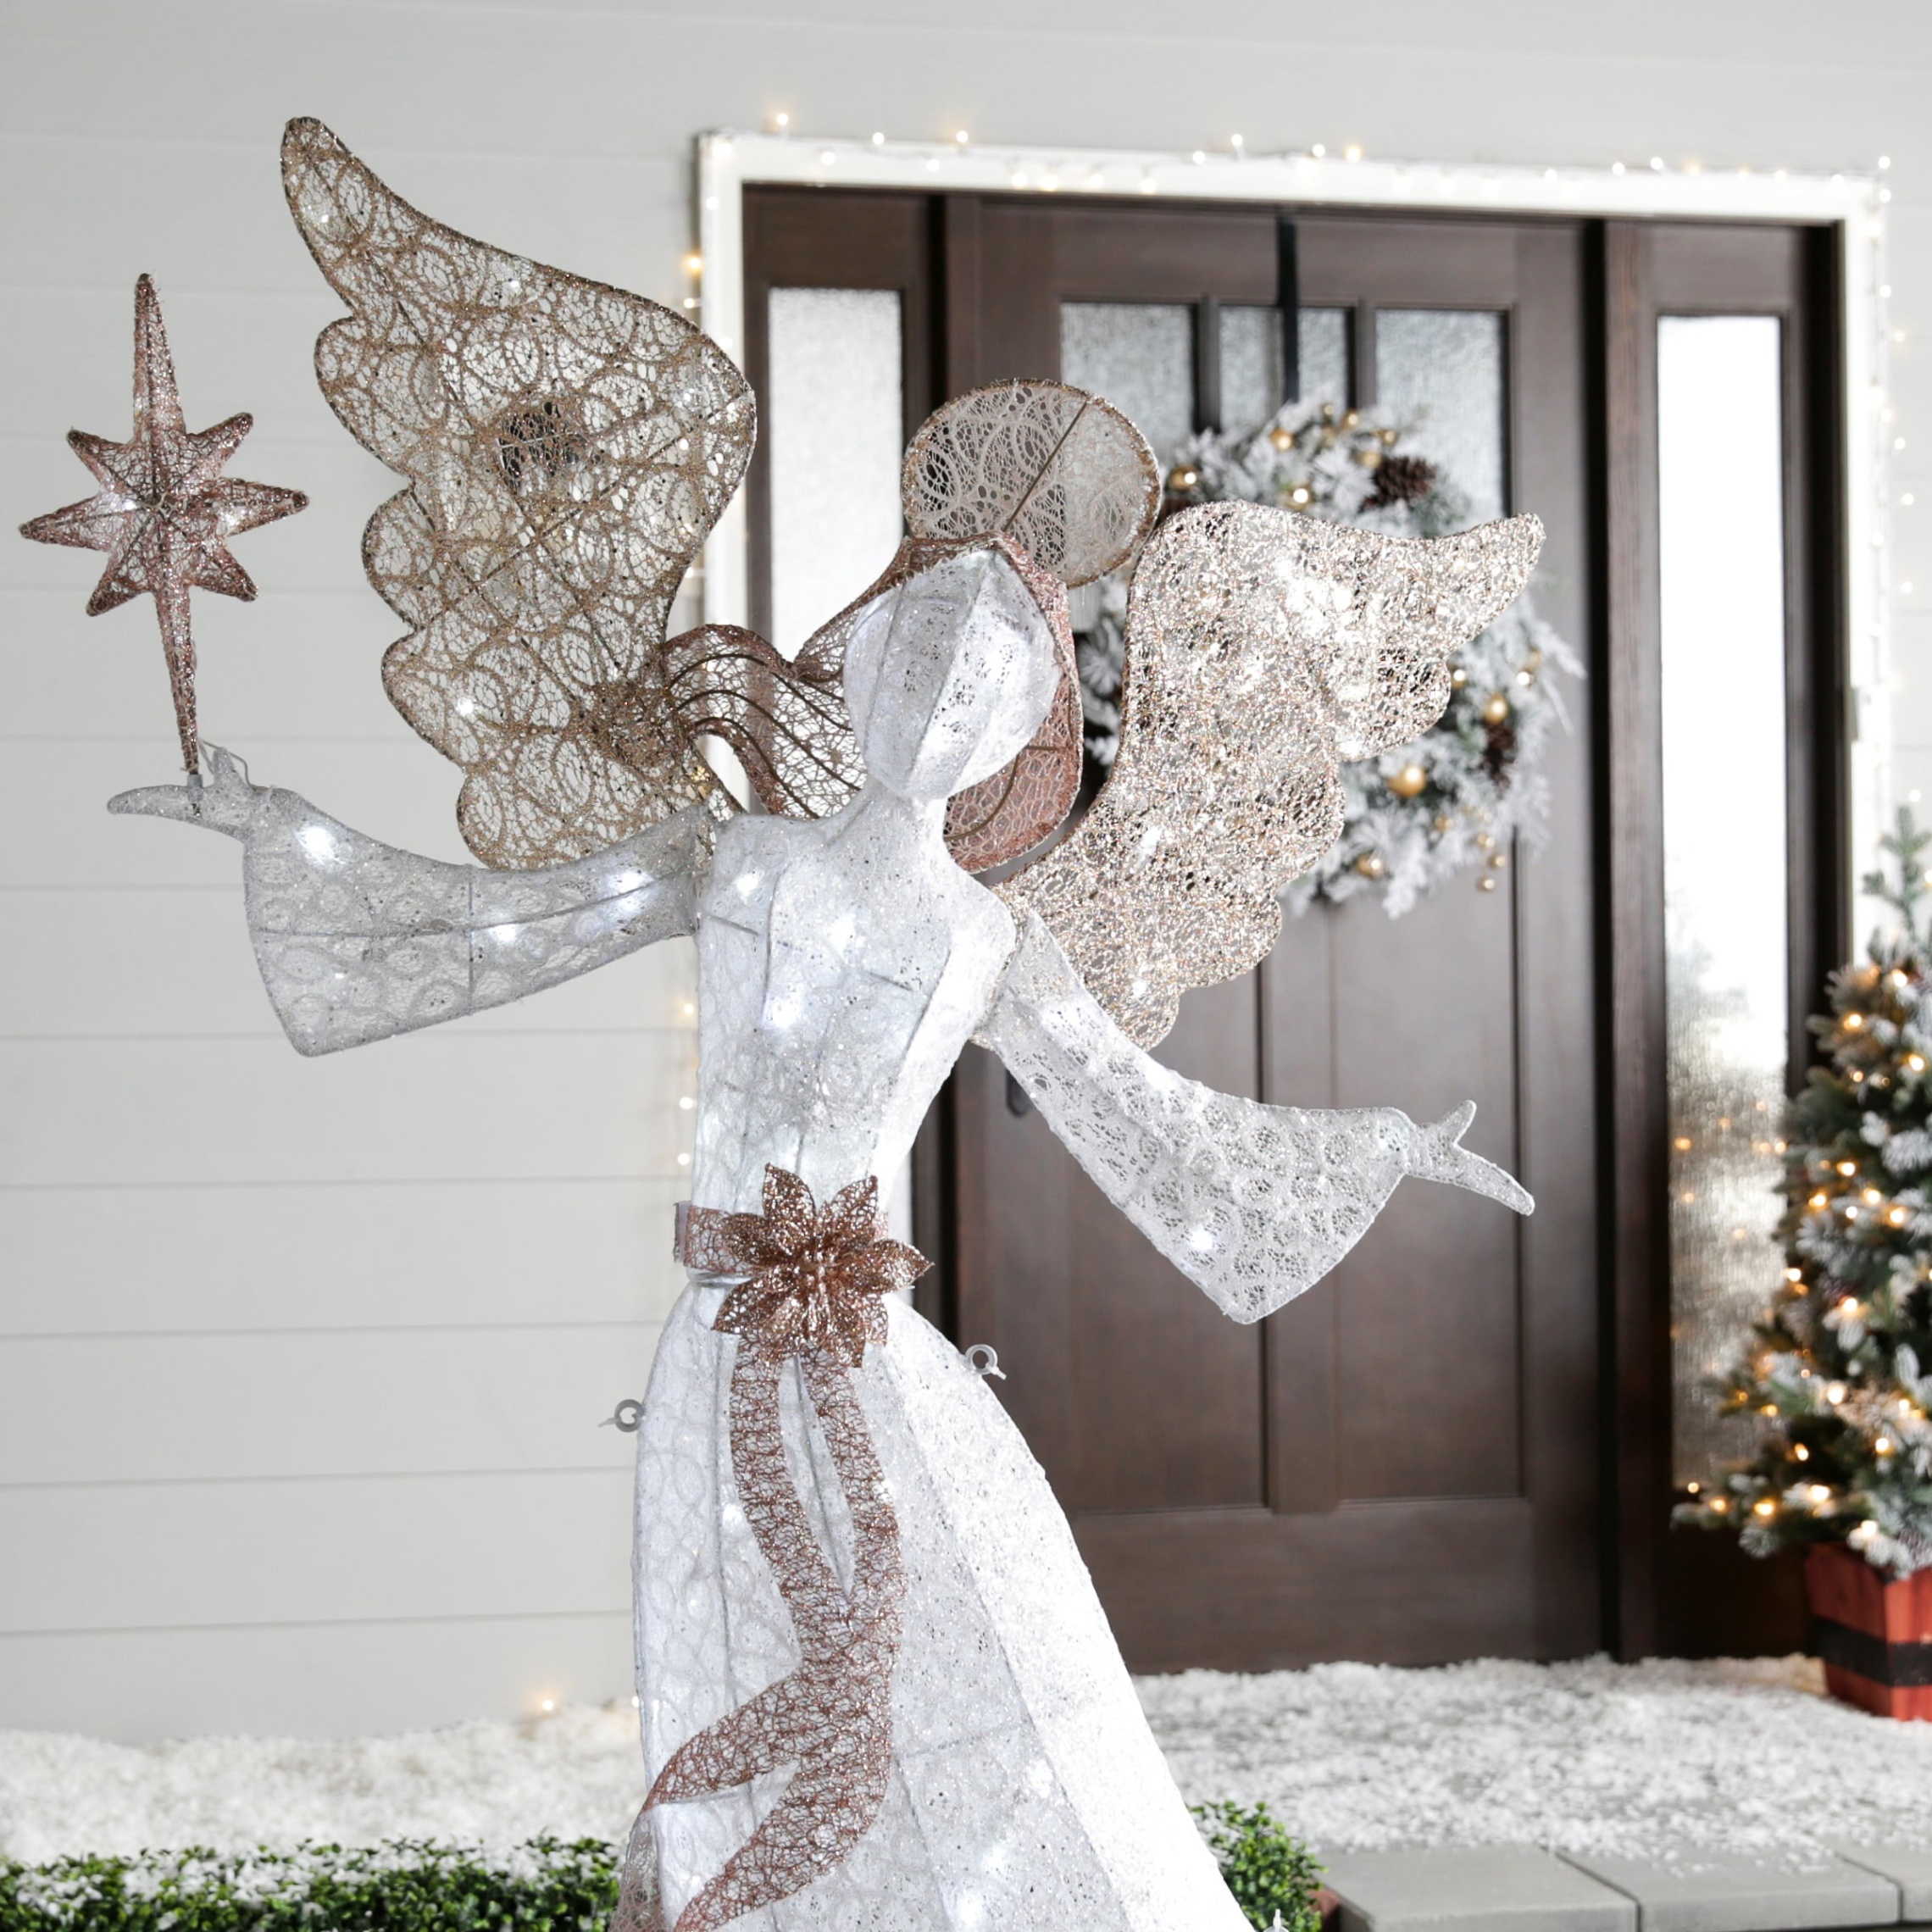 angel lawn decoration christmas Bulan 2 Holiday Living -in Angel Sculpture with White LED Lights at